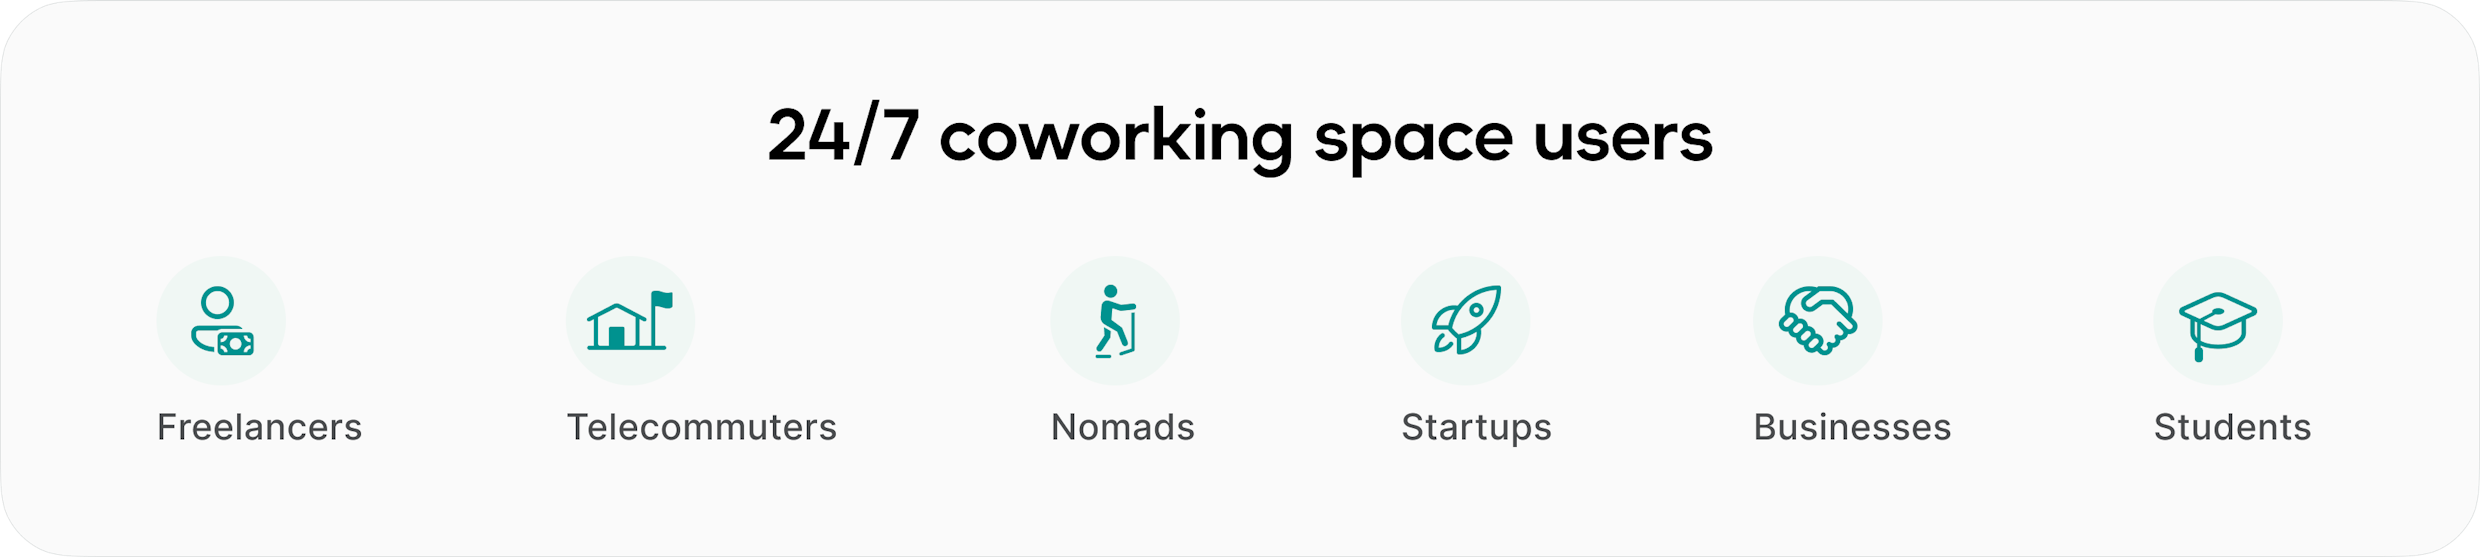 Users of 24/7 coworking spaces